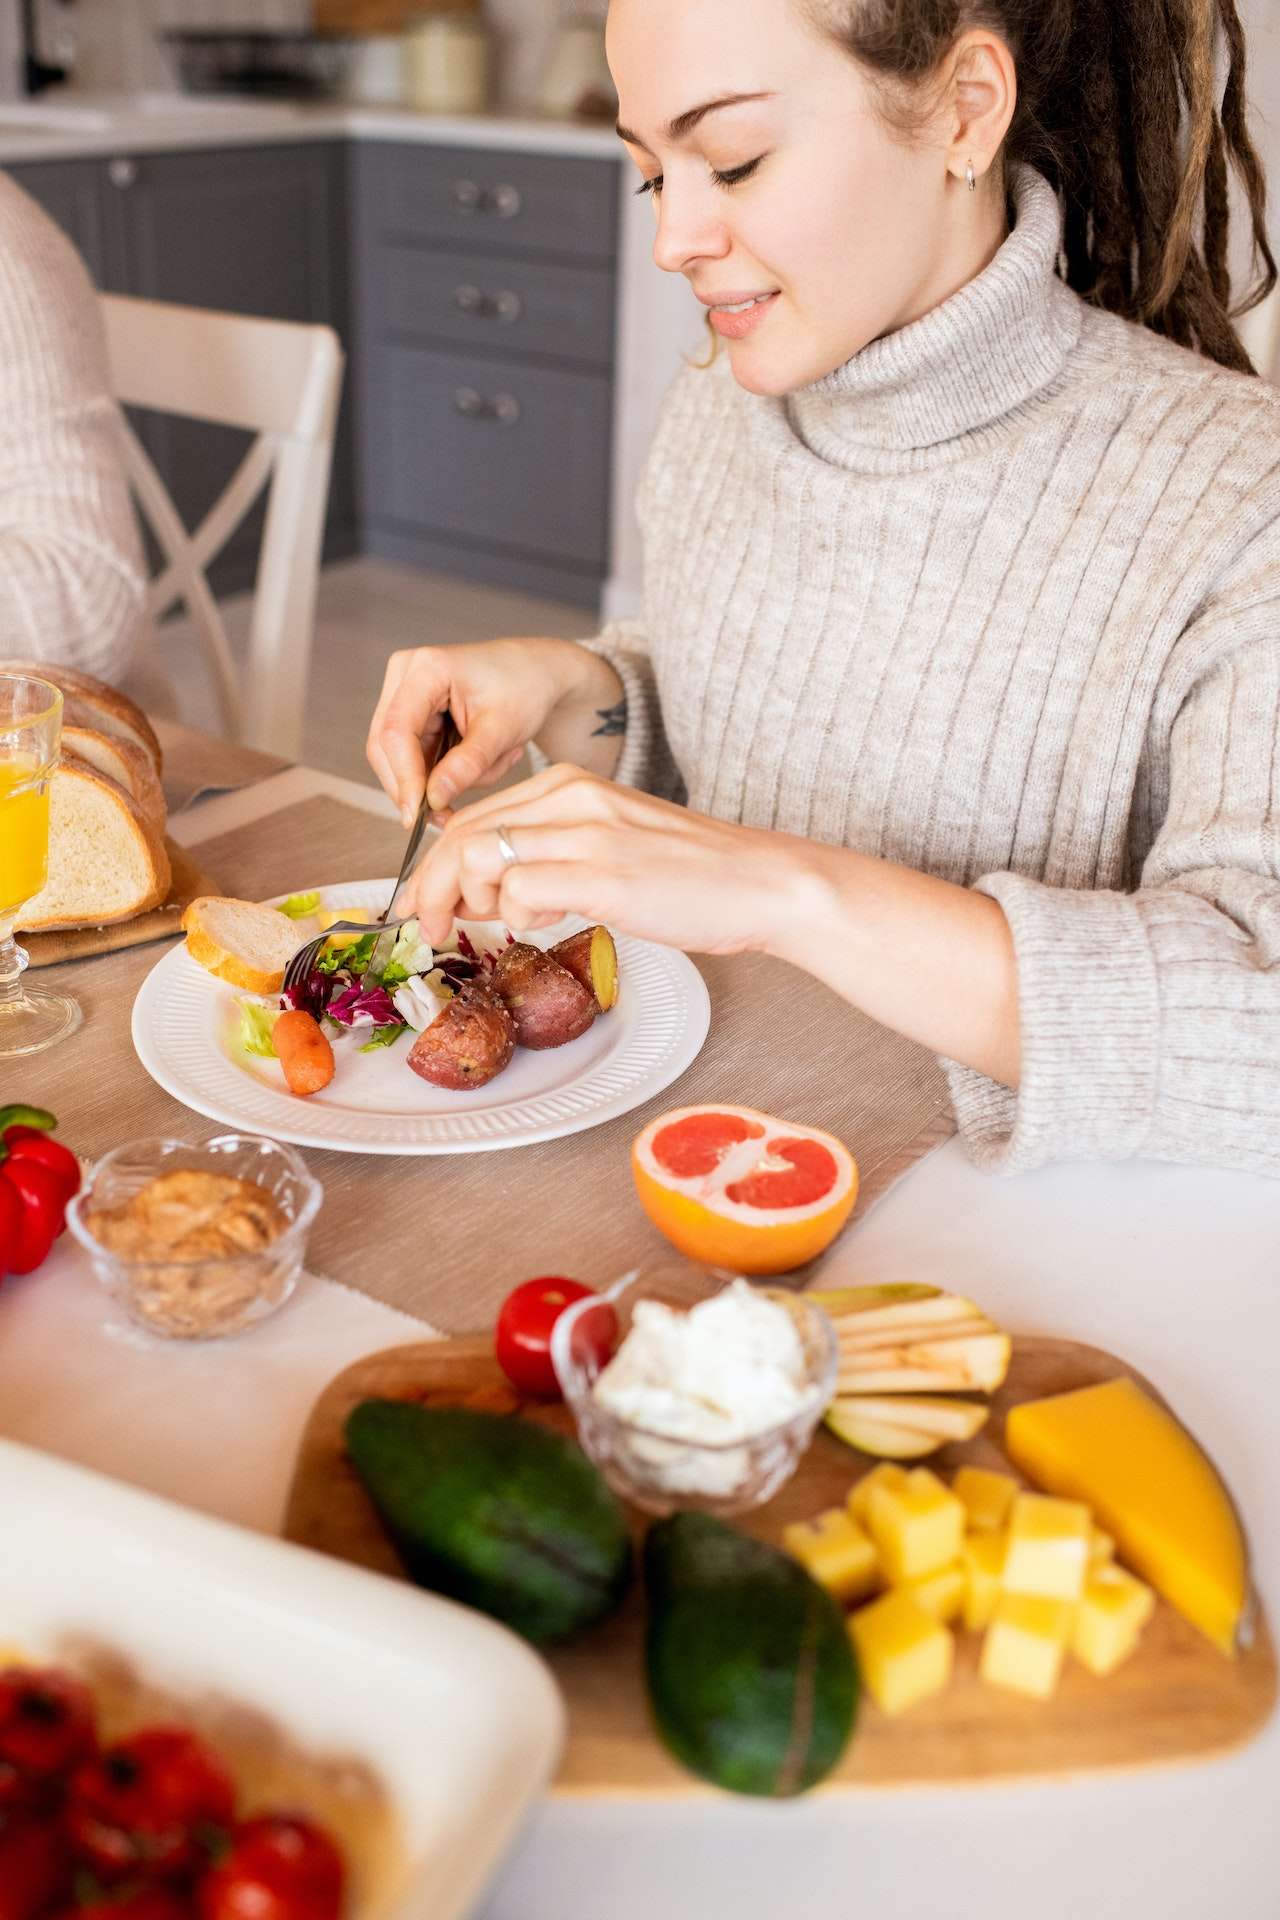 Woman In A Sweater Eating fruits